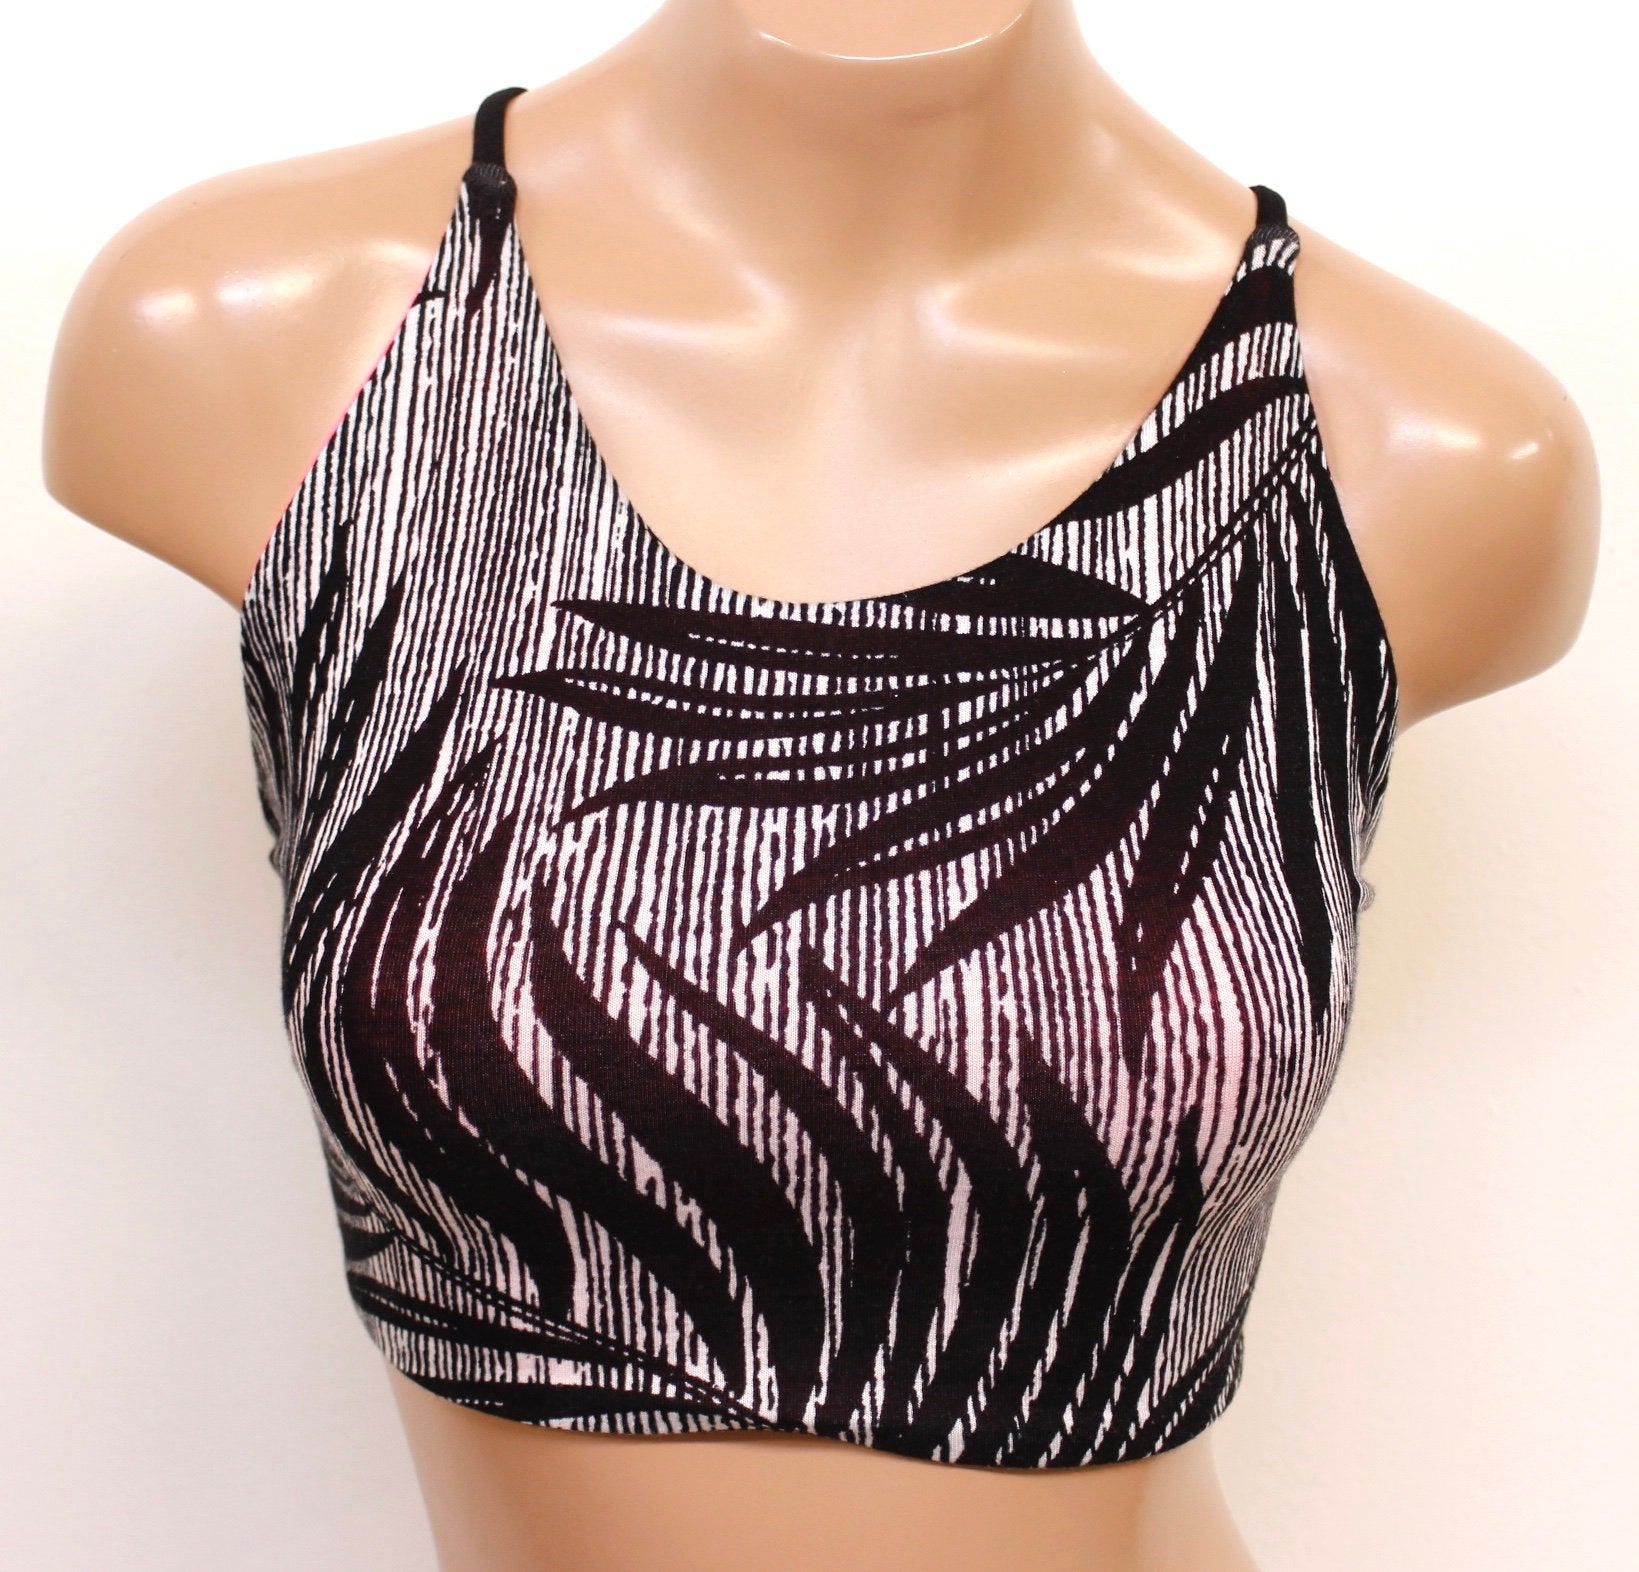 Ready to Ship! Muheeka Black and White Reversible PALM LEAF Print TOP, Crop Top, Open Back, Tank Top, Lace-Up, Stripes, Neon Pink